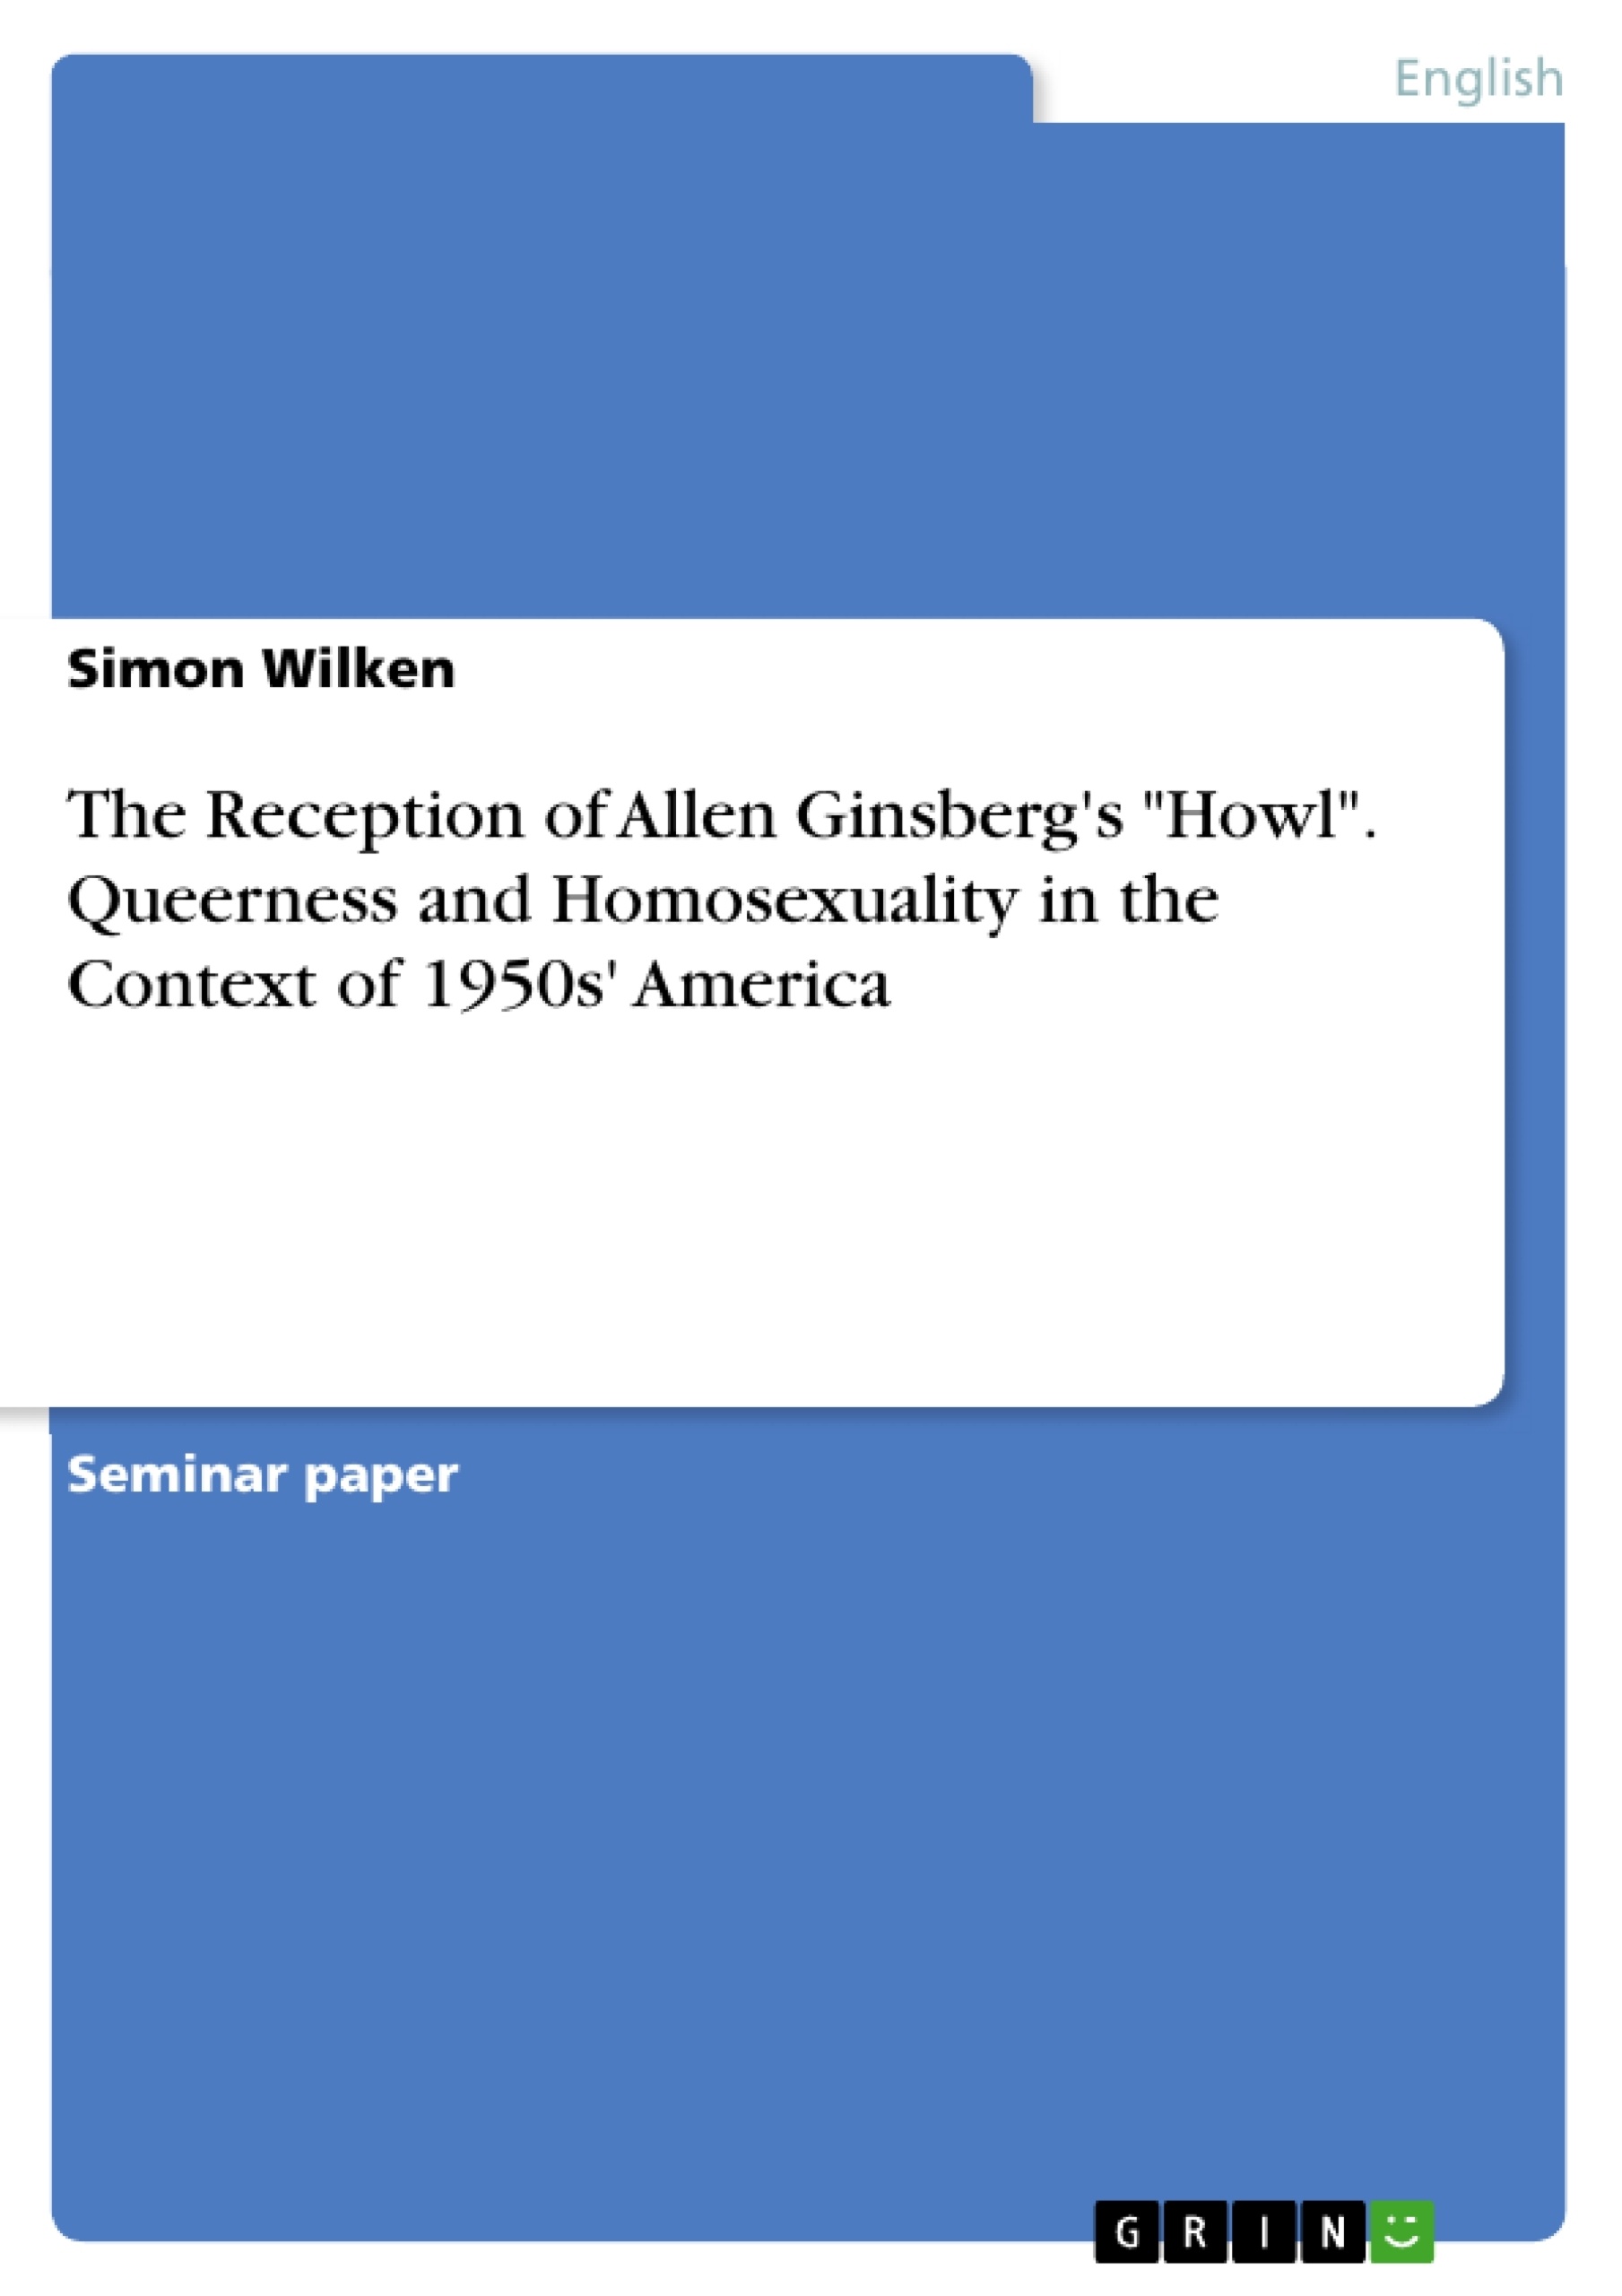 Title: The Reception of Allen Ginsberg's "Howl". Queerness and Homosexuality in the Context of 1950s' America